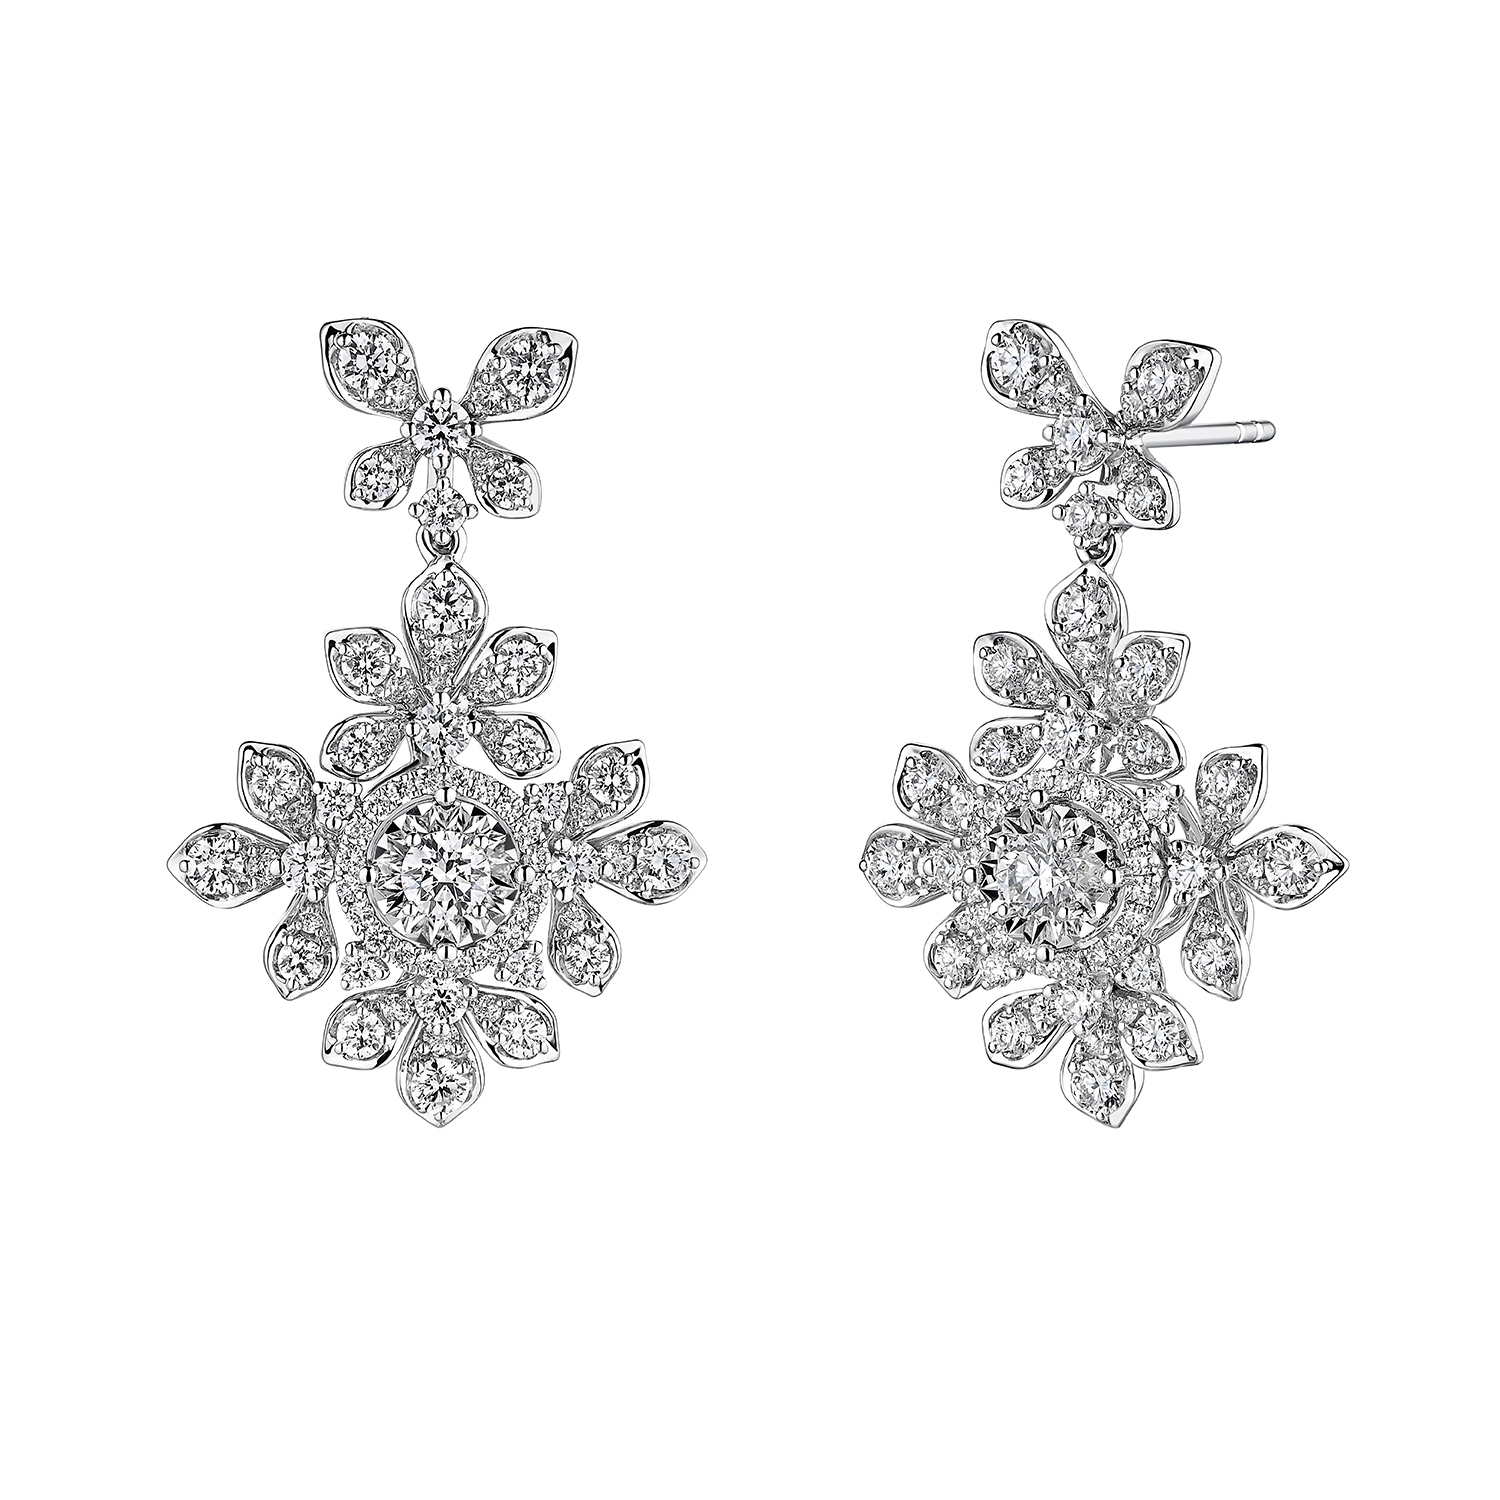 Wedding Collection "Enchanted Blossom" 18K Gold Diamond Earrings